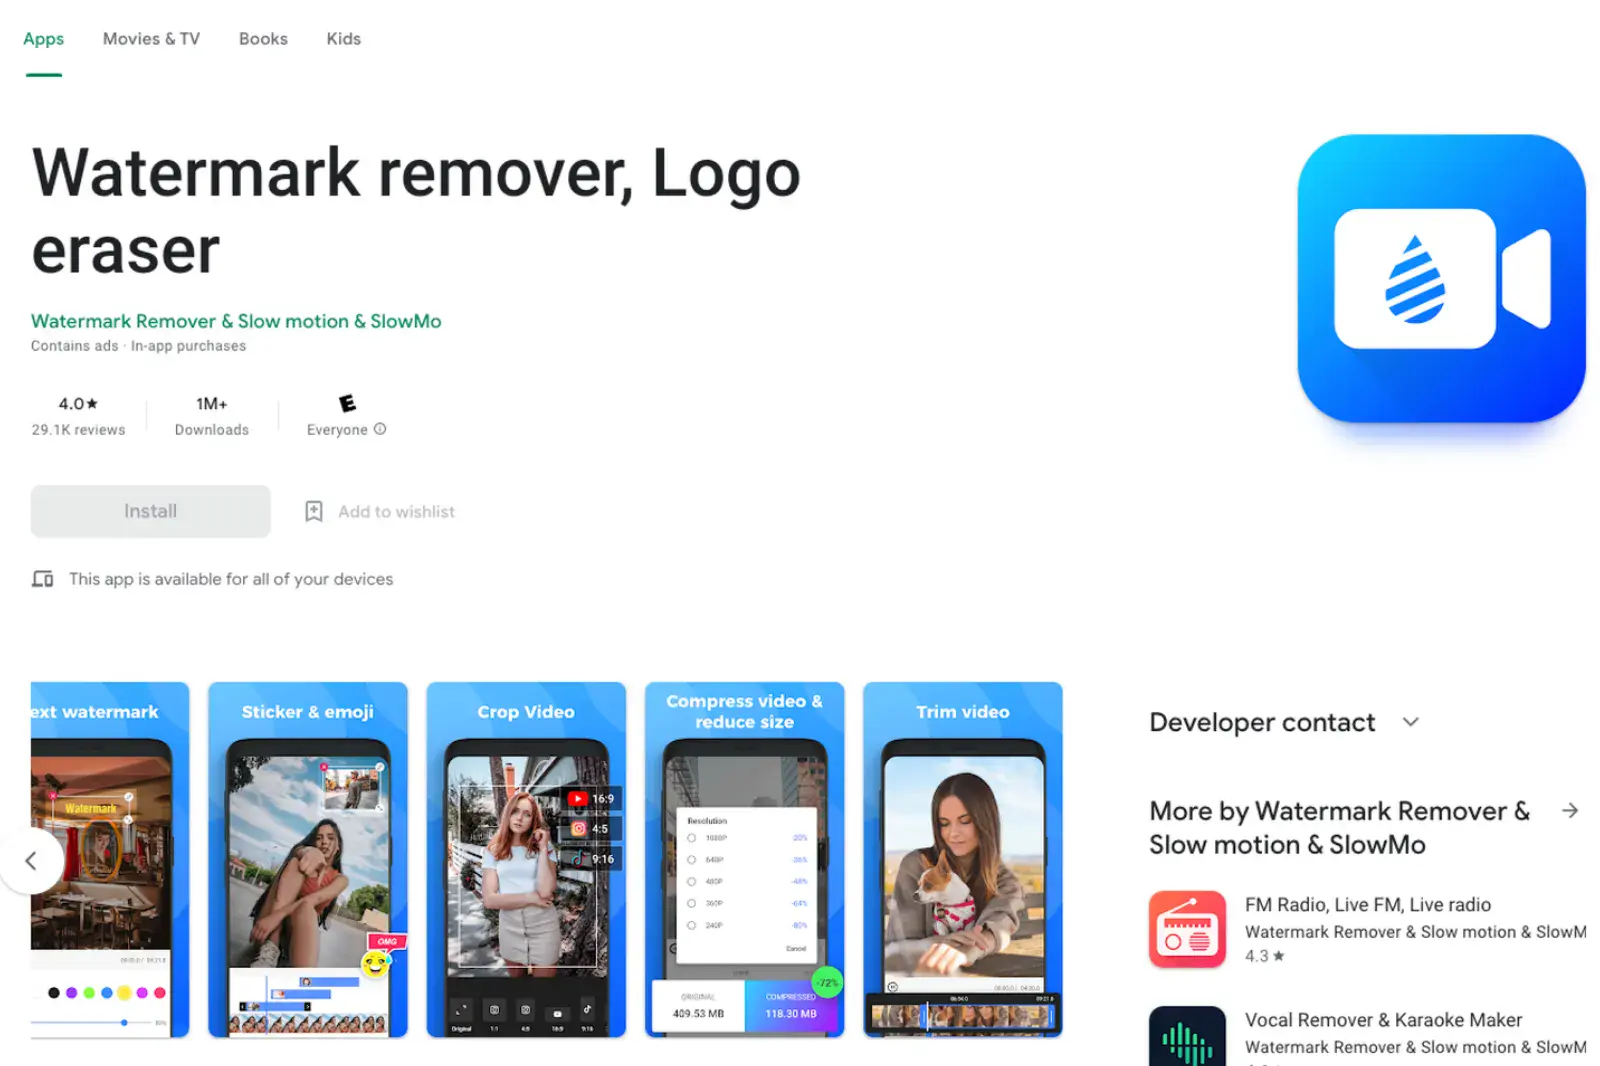 Home Page of Watermark Remover & Logo Eraser